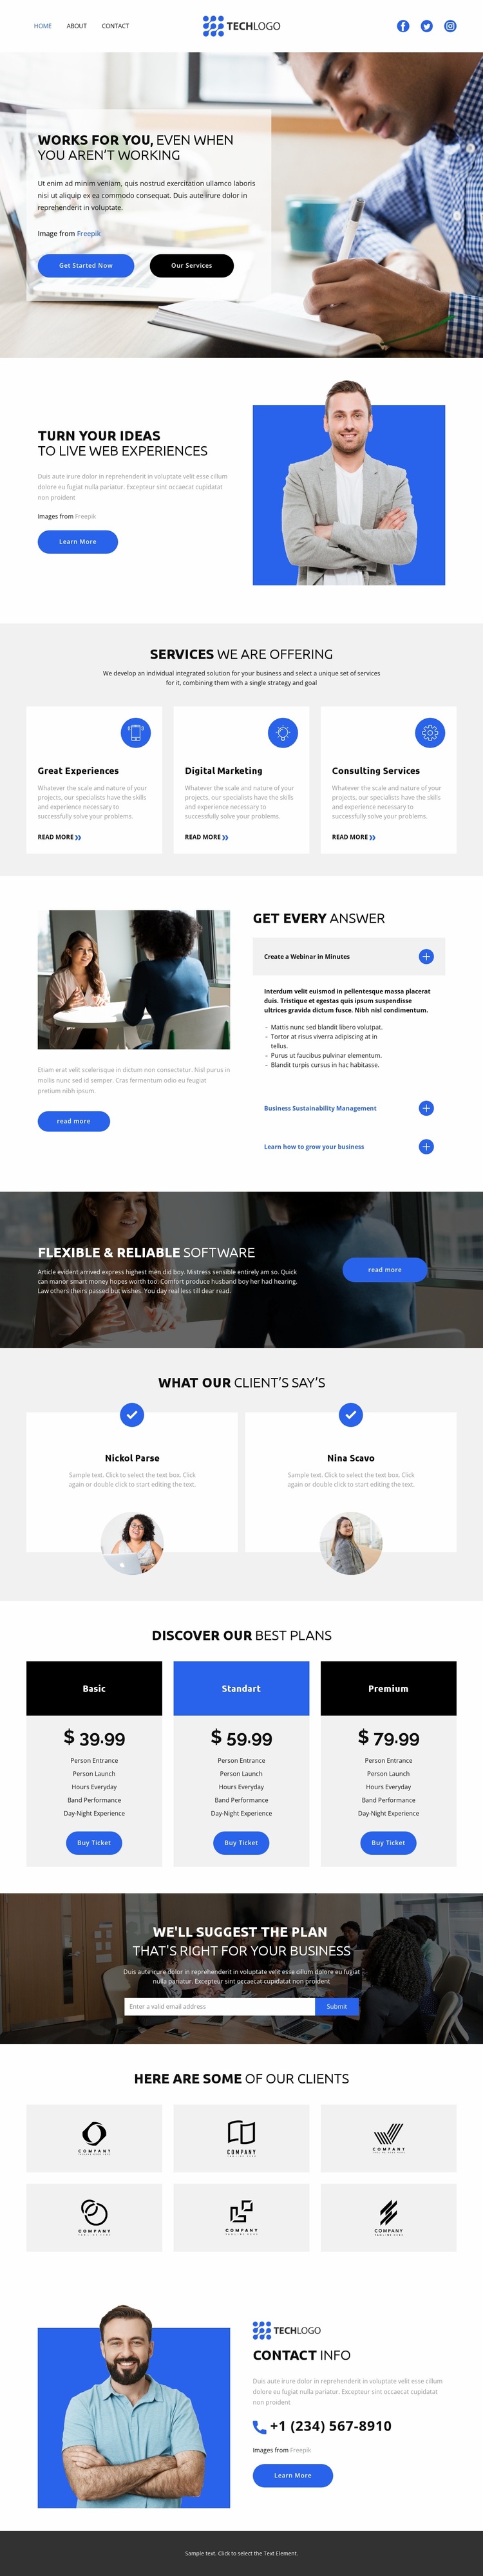 Career Opportunities Landing Page